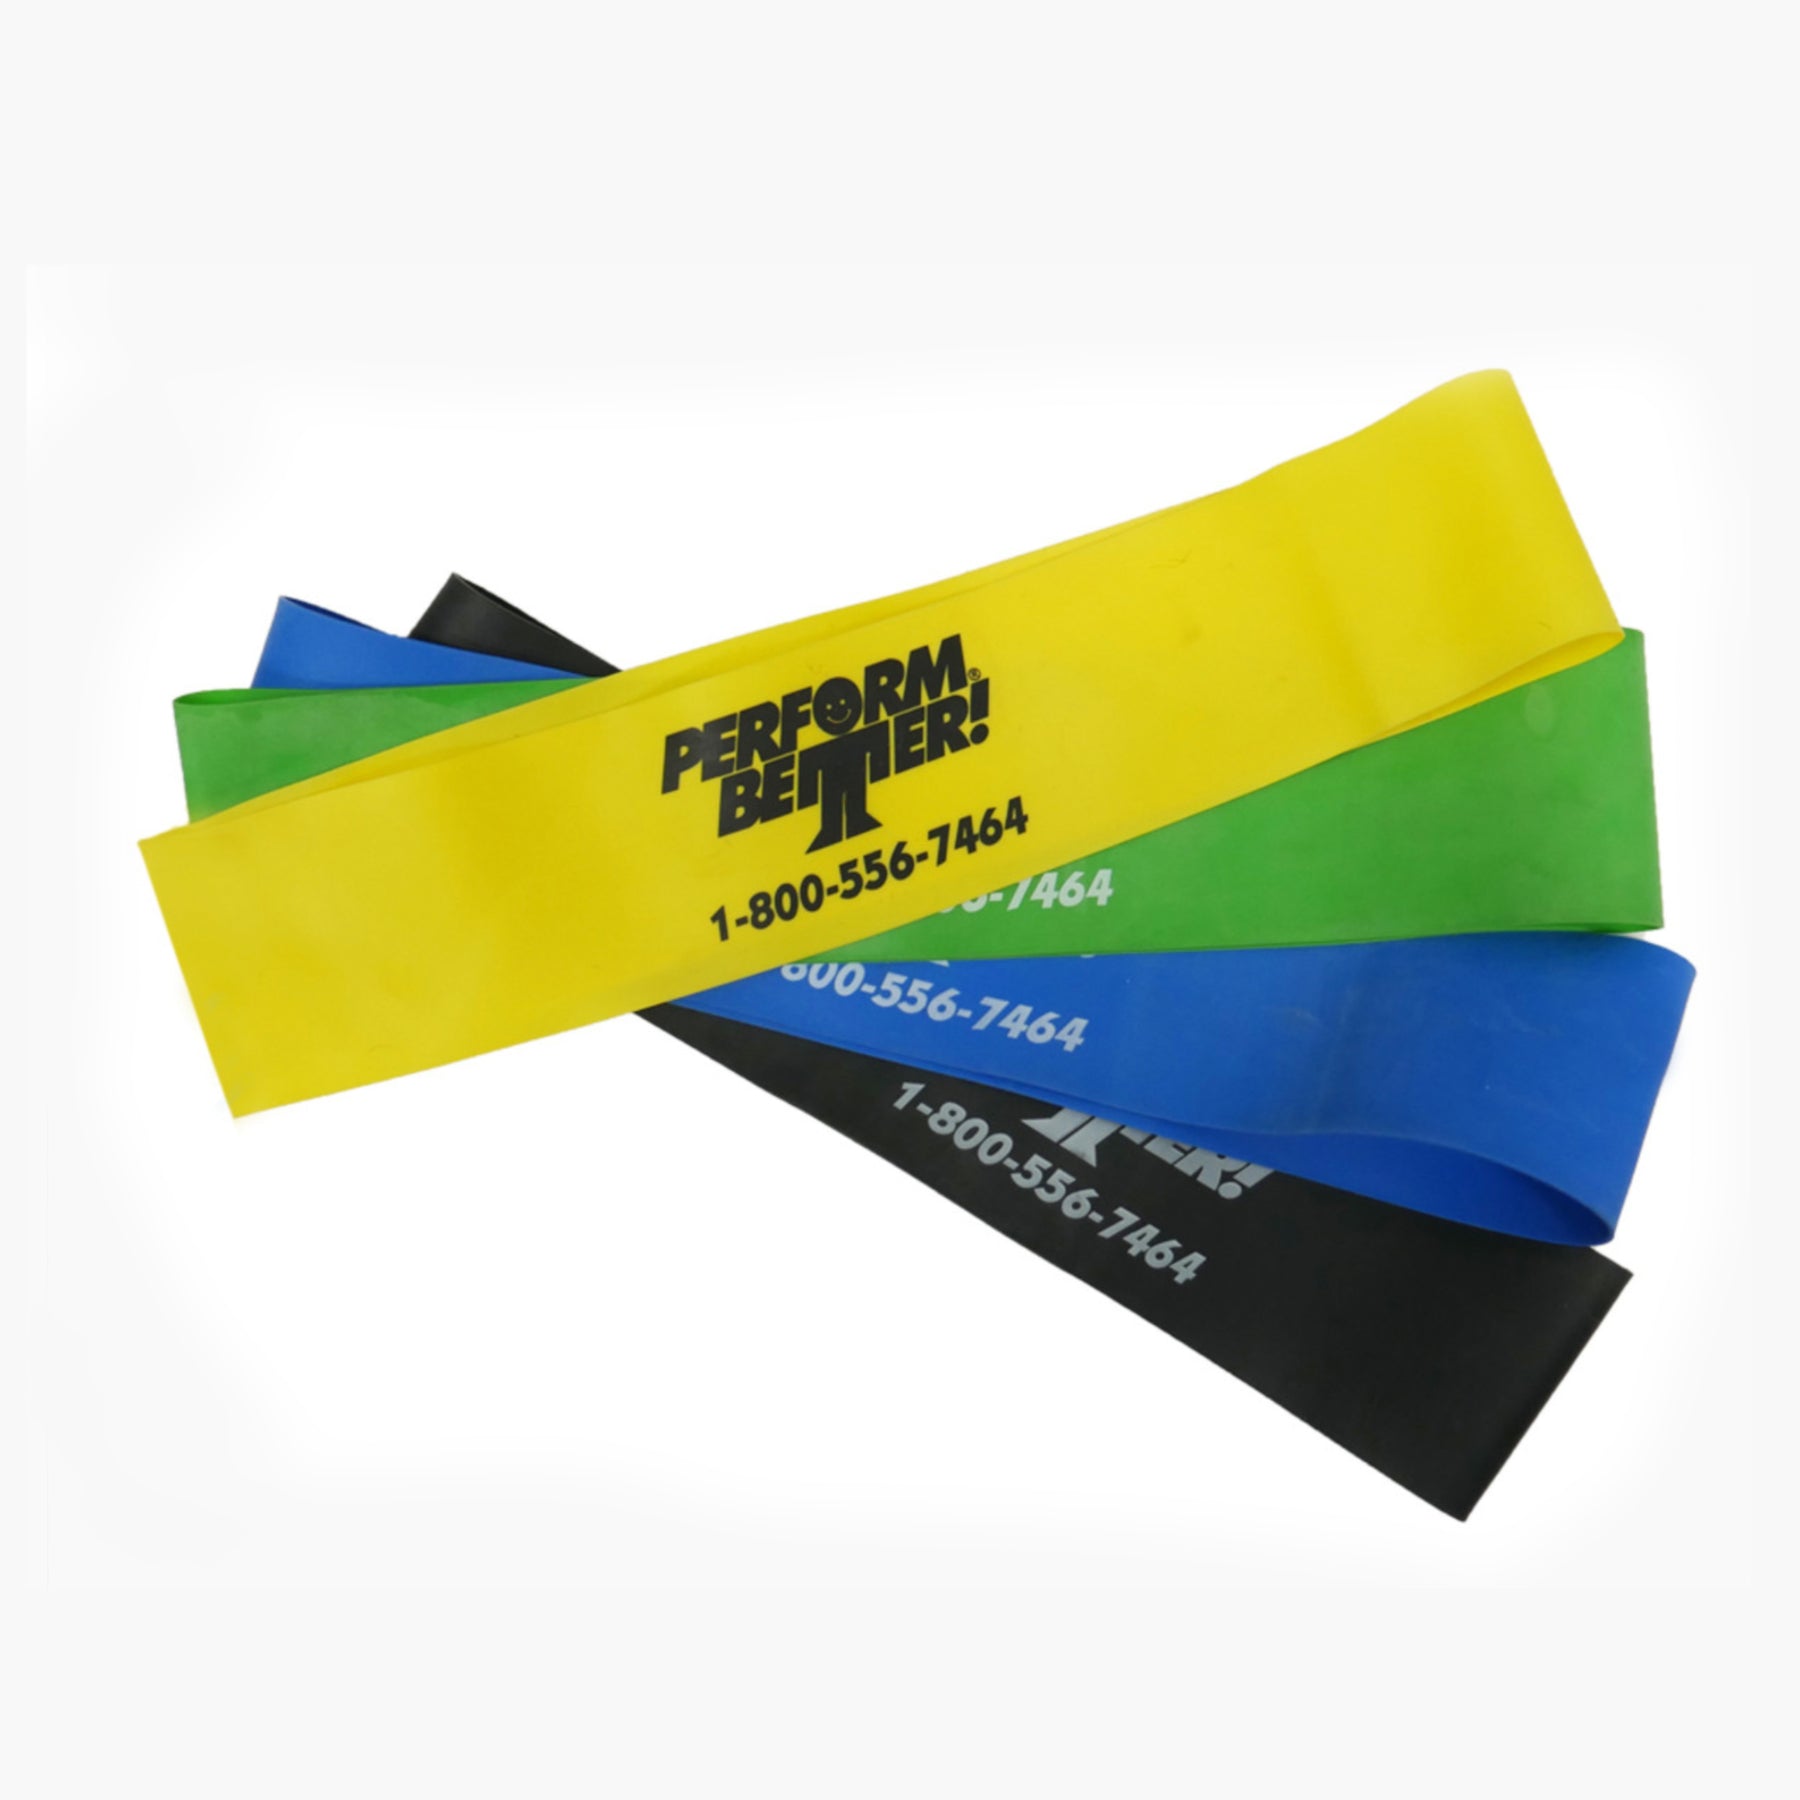 Exercise Equipment - Small Loop Resistance Bands